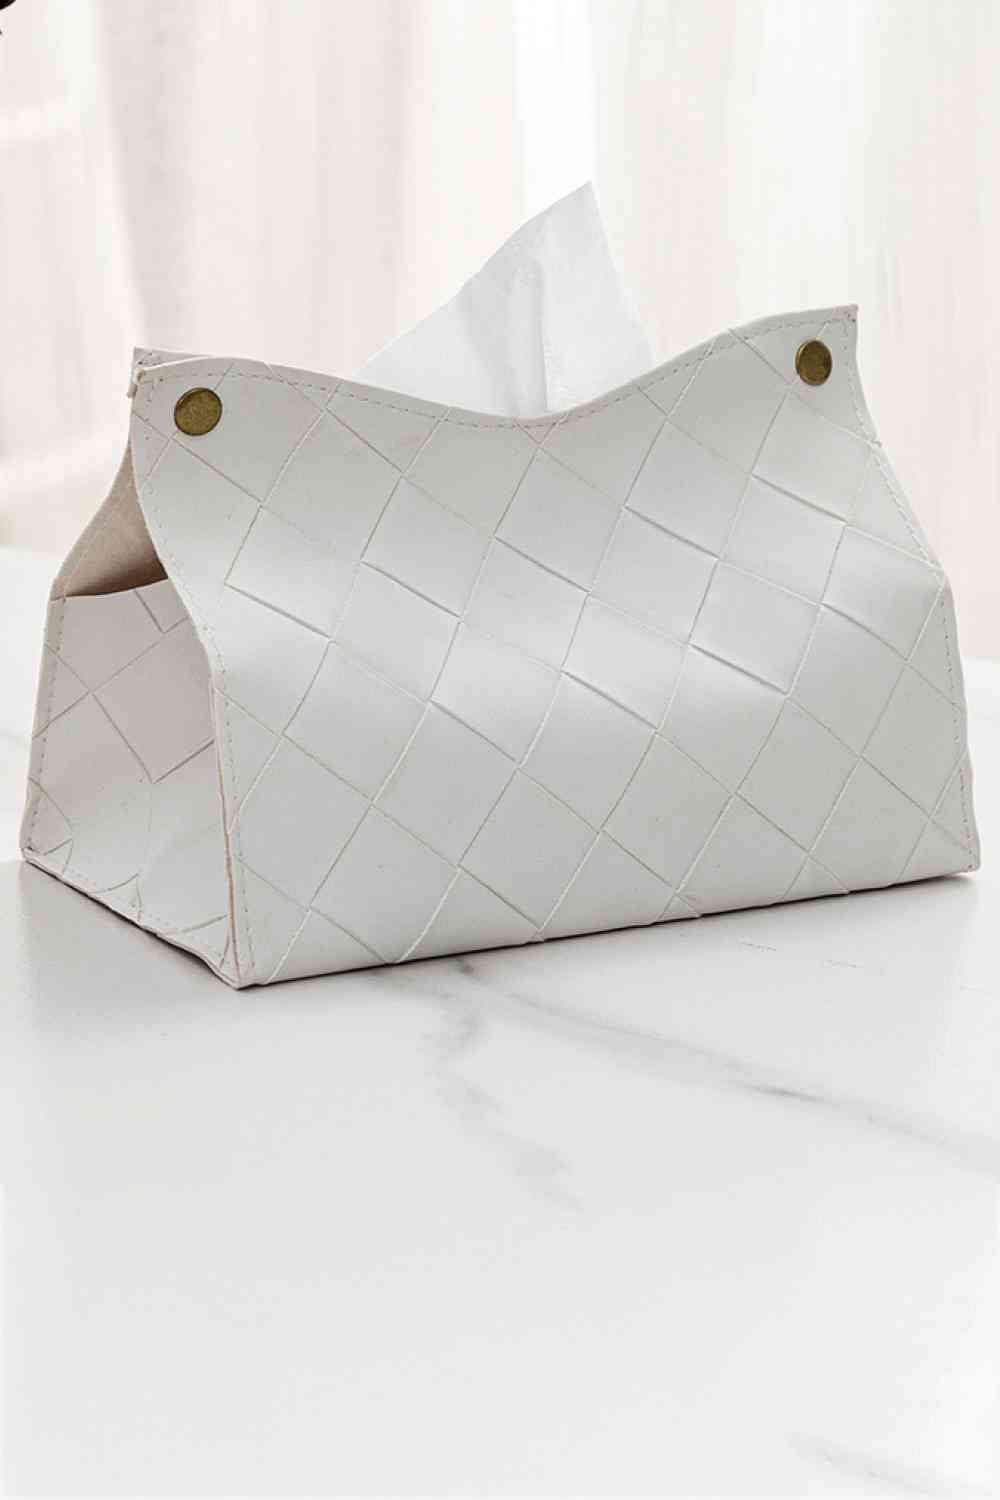 2-Pack Woven PU Tissue Box Covers White One Size 